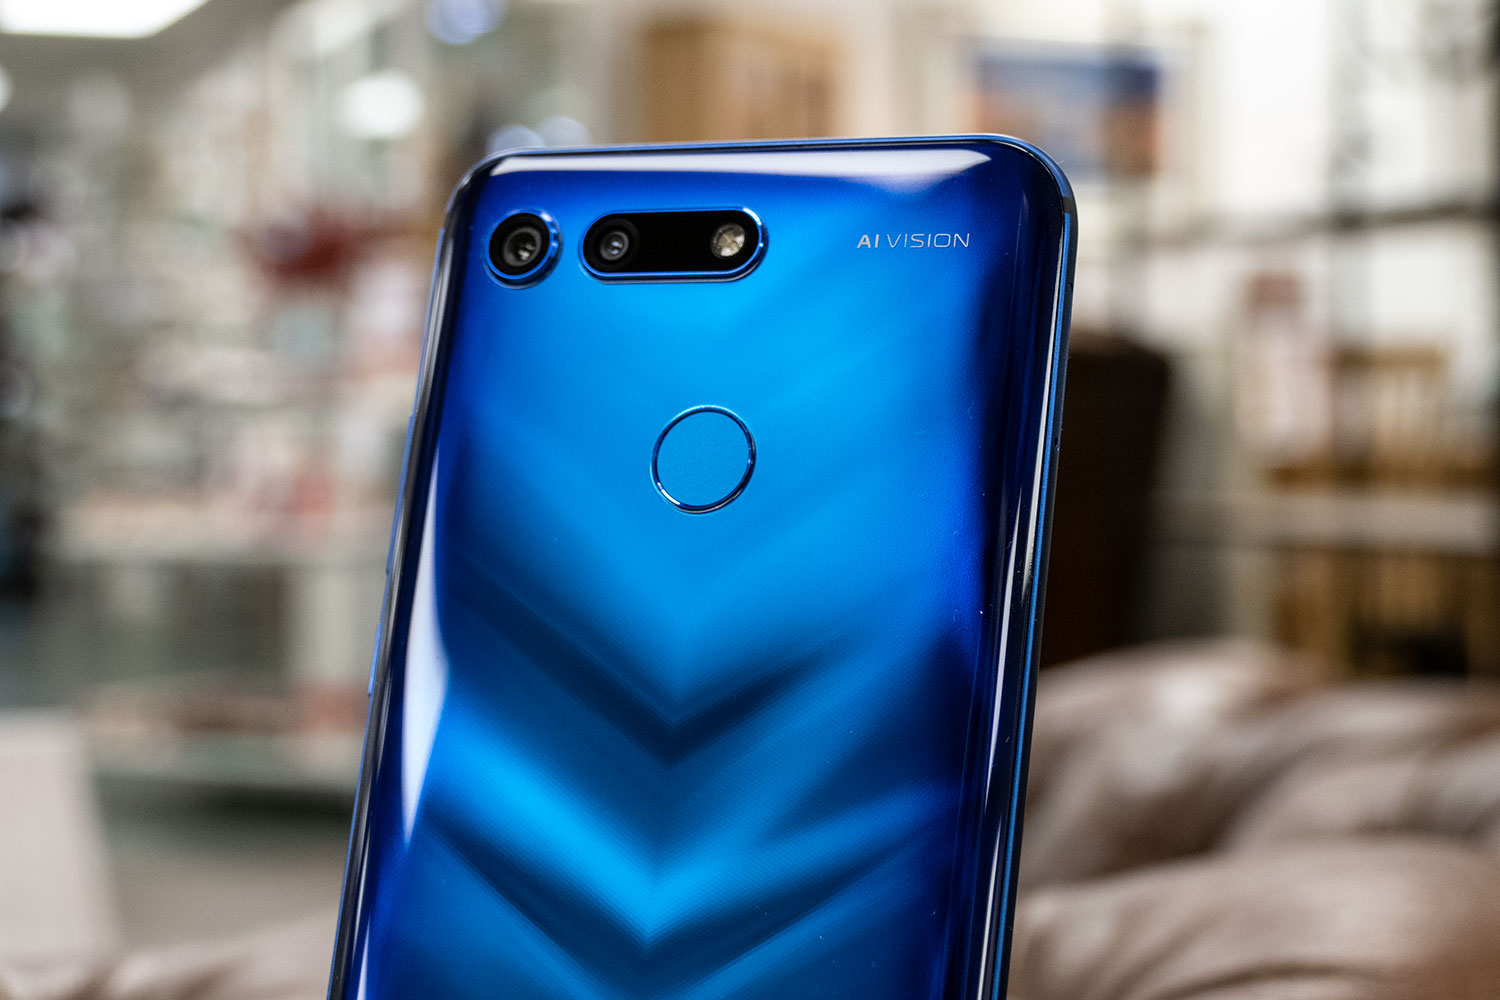 Honor View 20 review